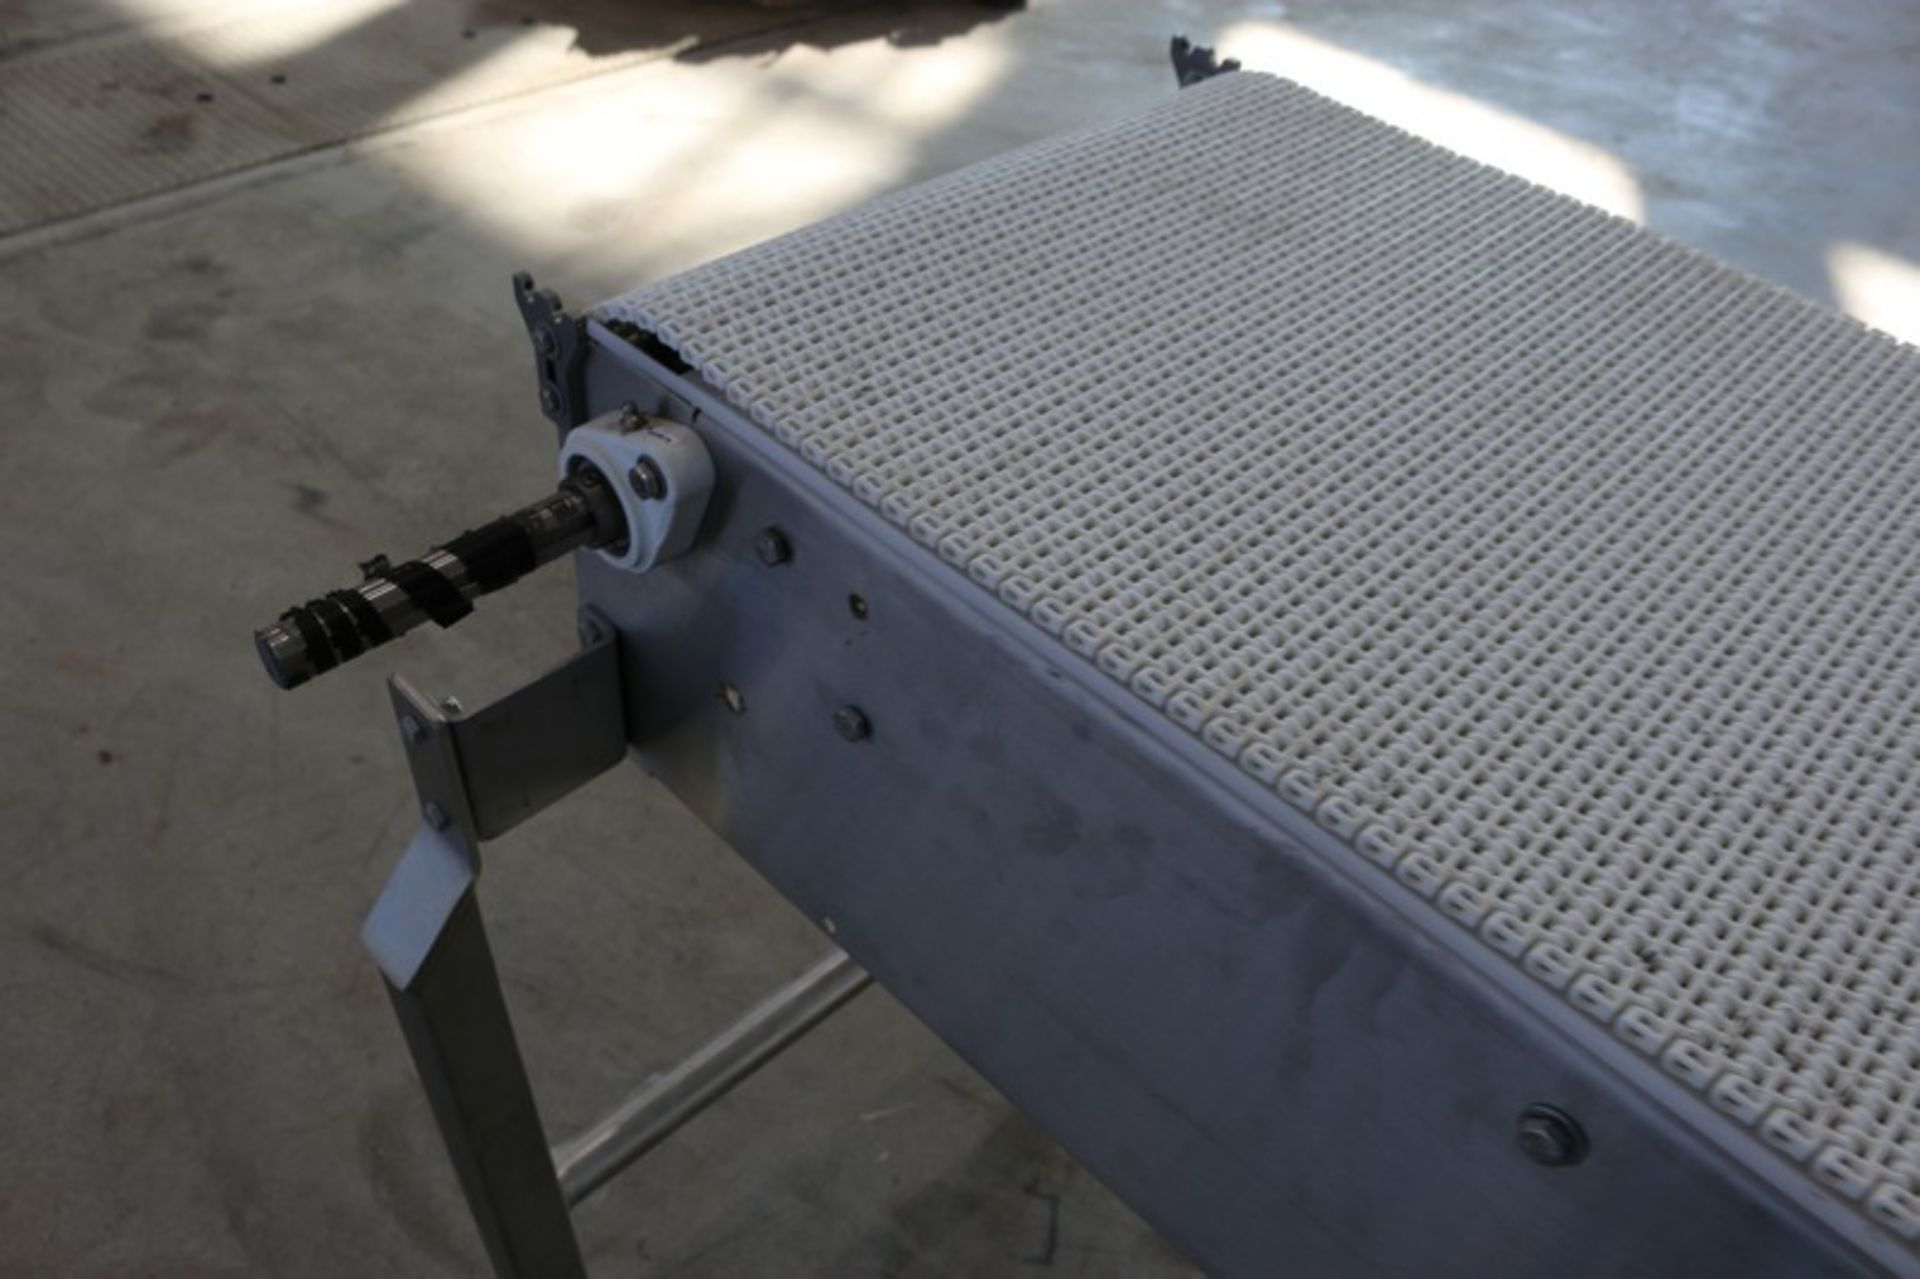 Straight Section of S/S Conveyor,with White Interlock Belt, Aprox. 55" L x 18" H Belt, Mounted on - Image 6 of 8